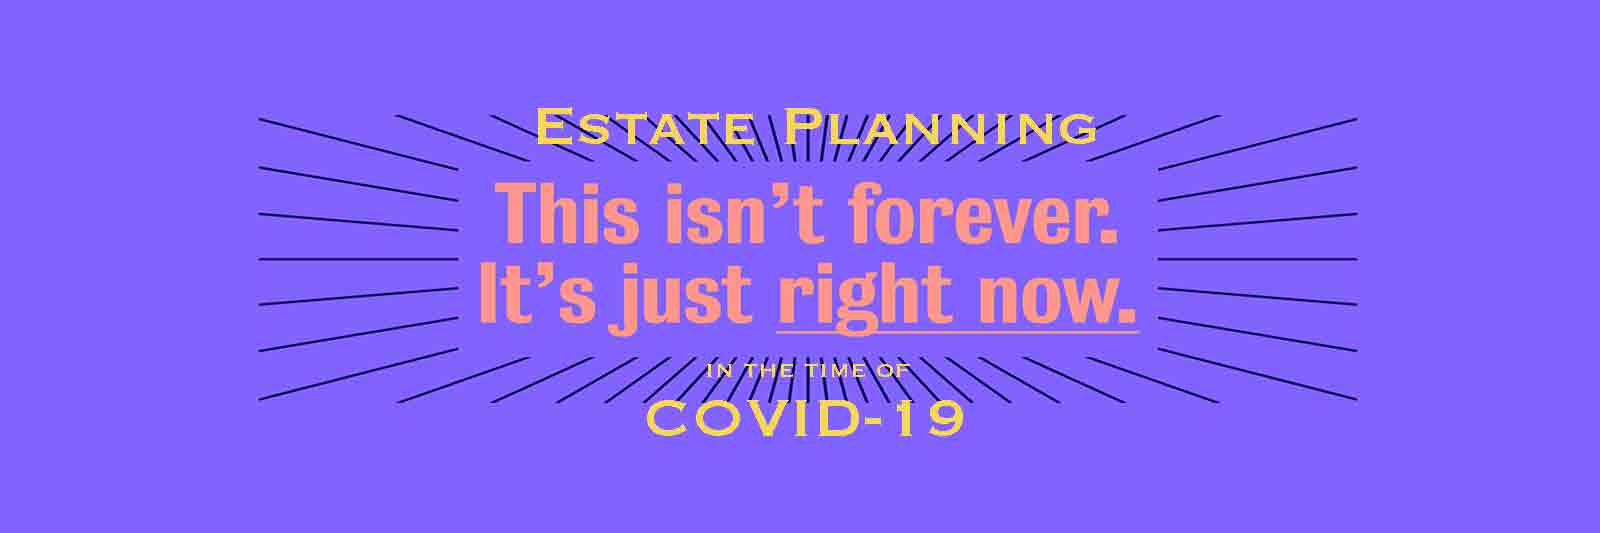 Estate Planning in the time of COVID-19: This isn't forever. It's just right now.